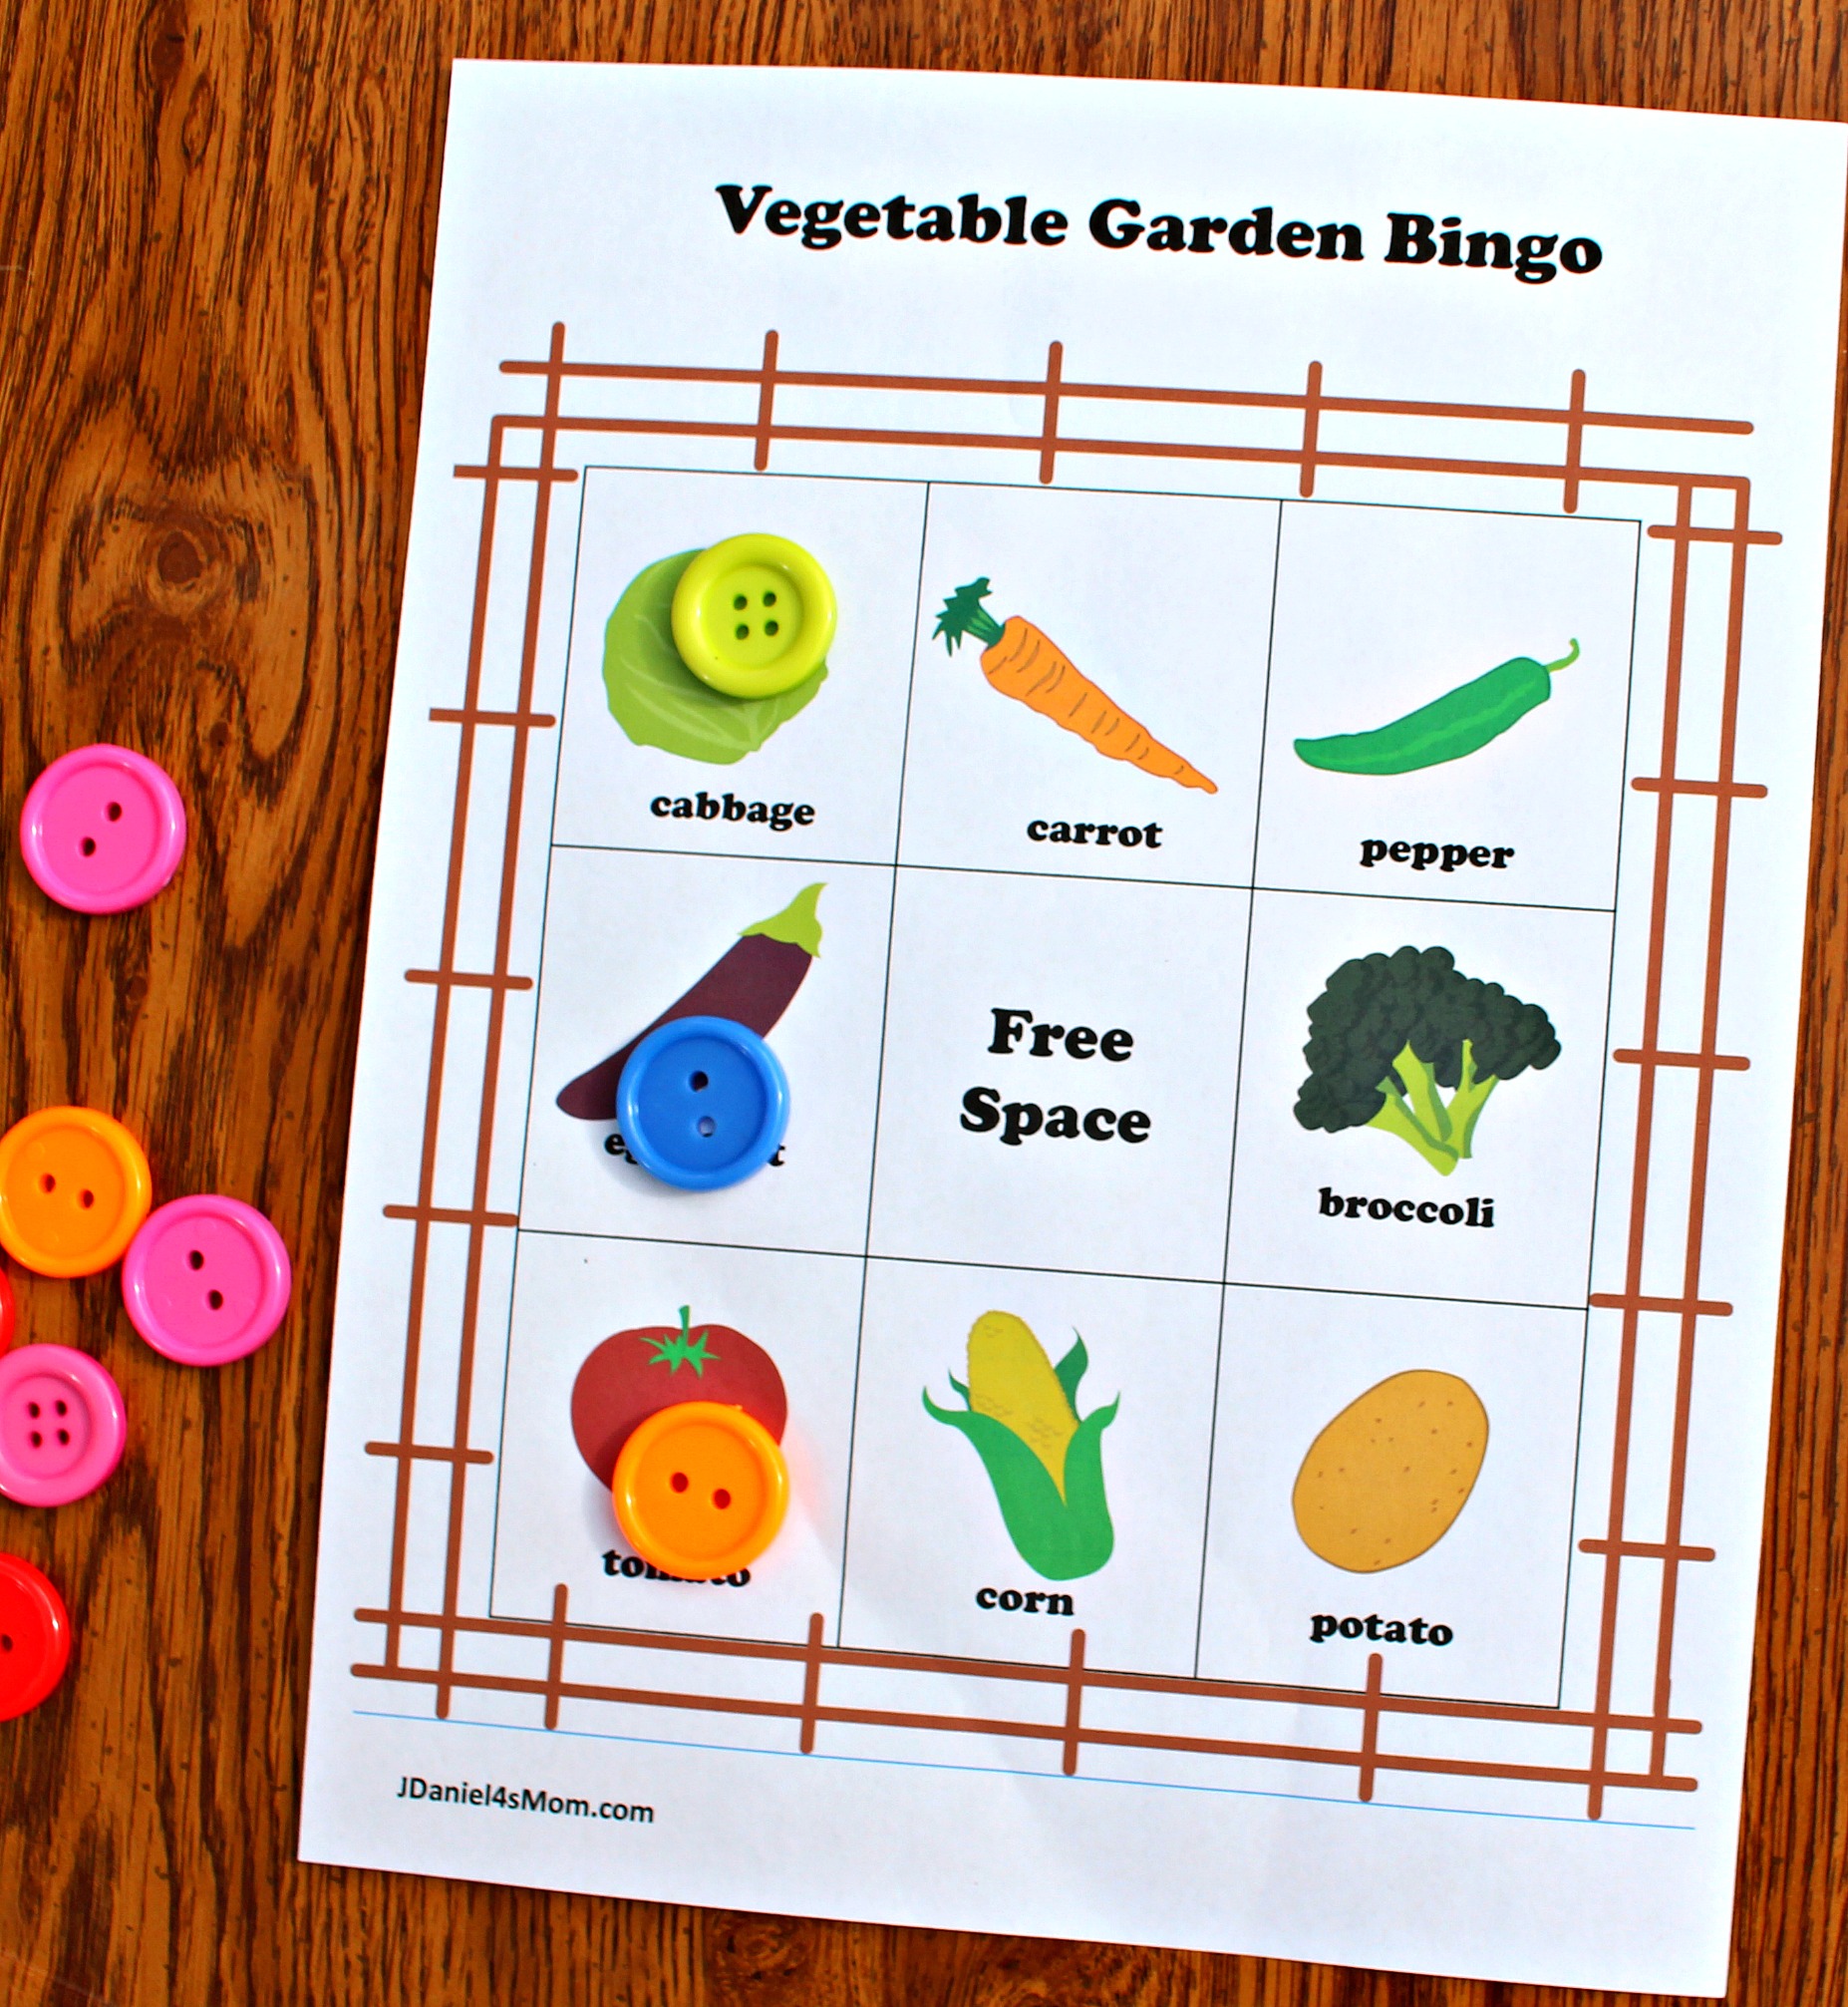 Peter Rabbit Garden Themed Printable Bingo Cards - There are 10 cards in the set.